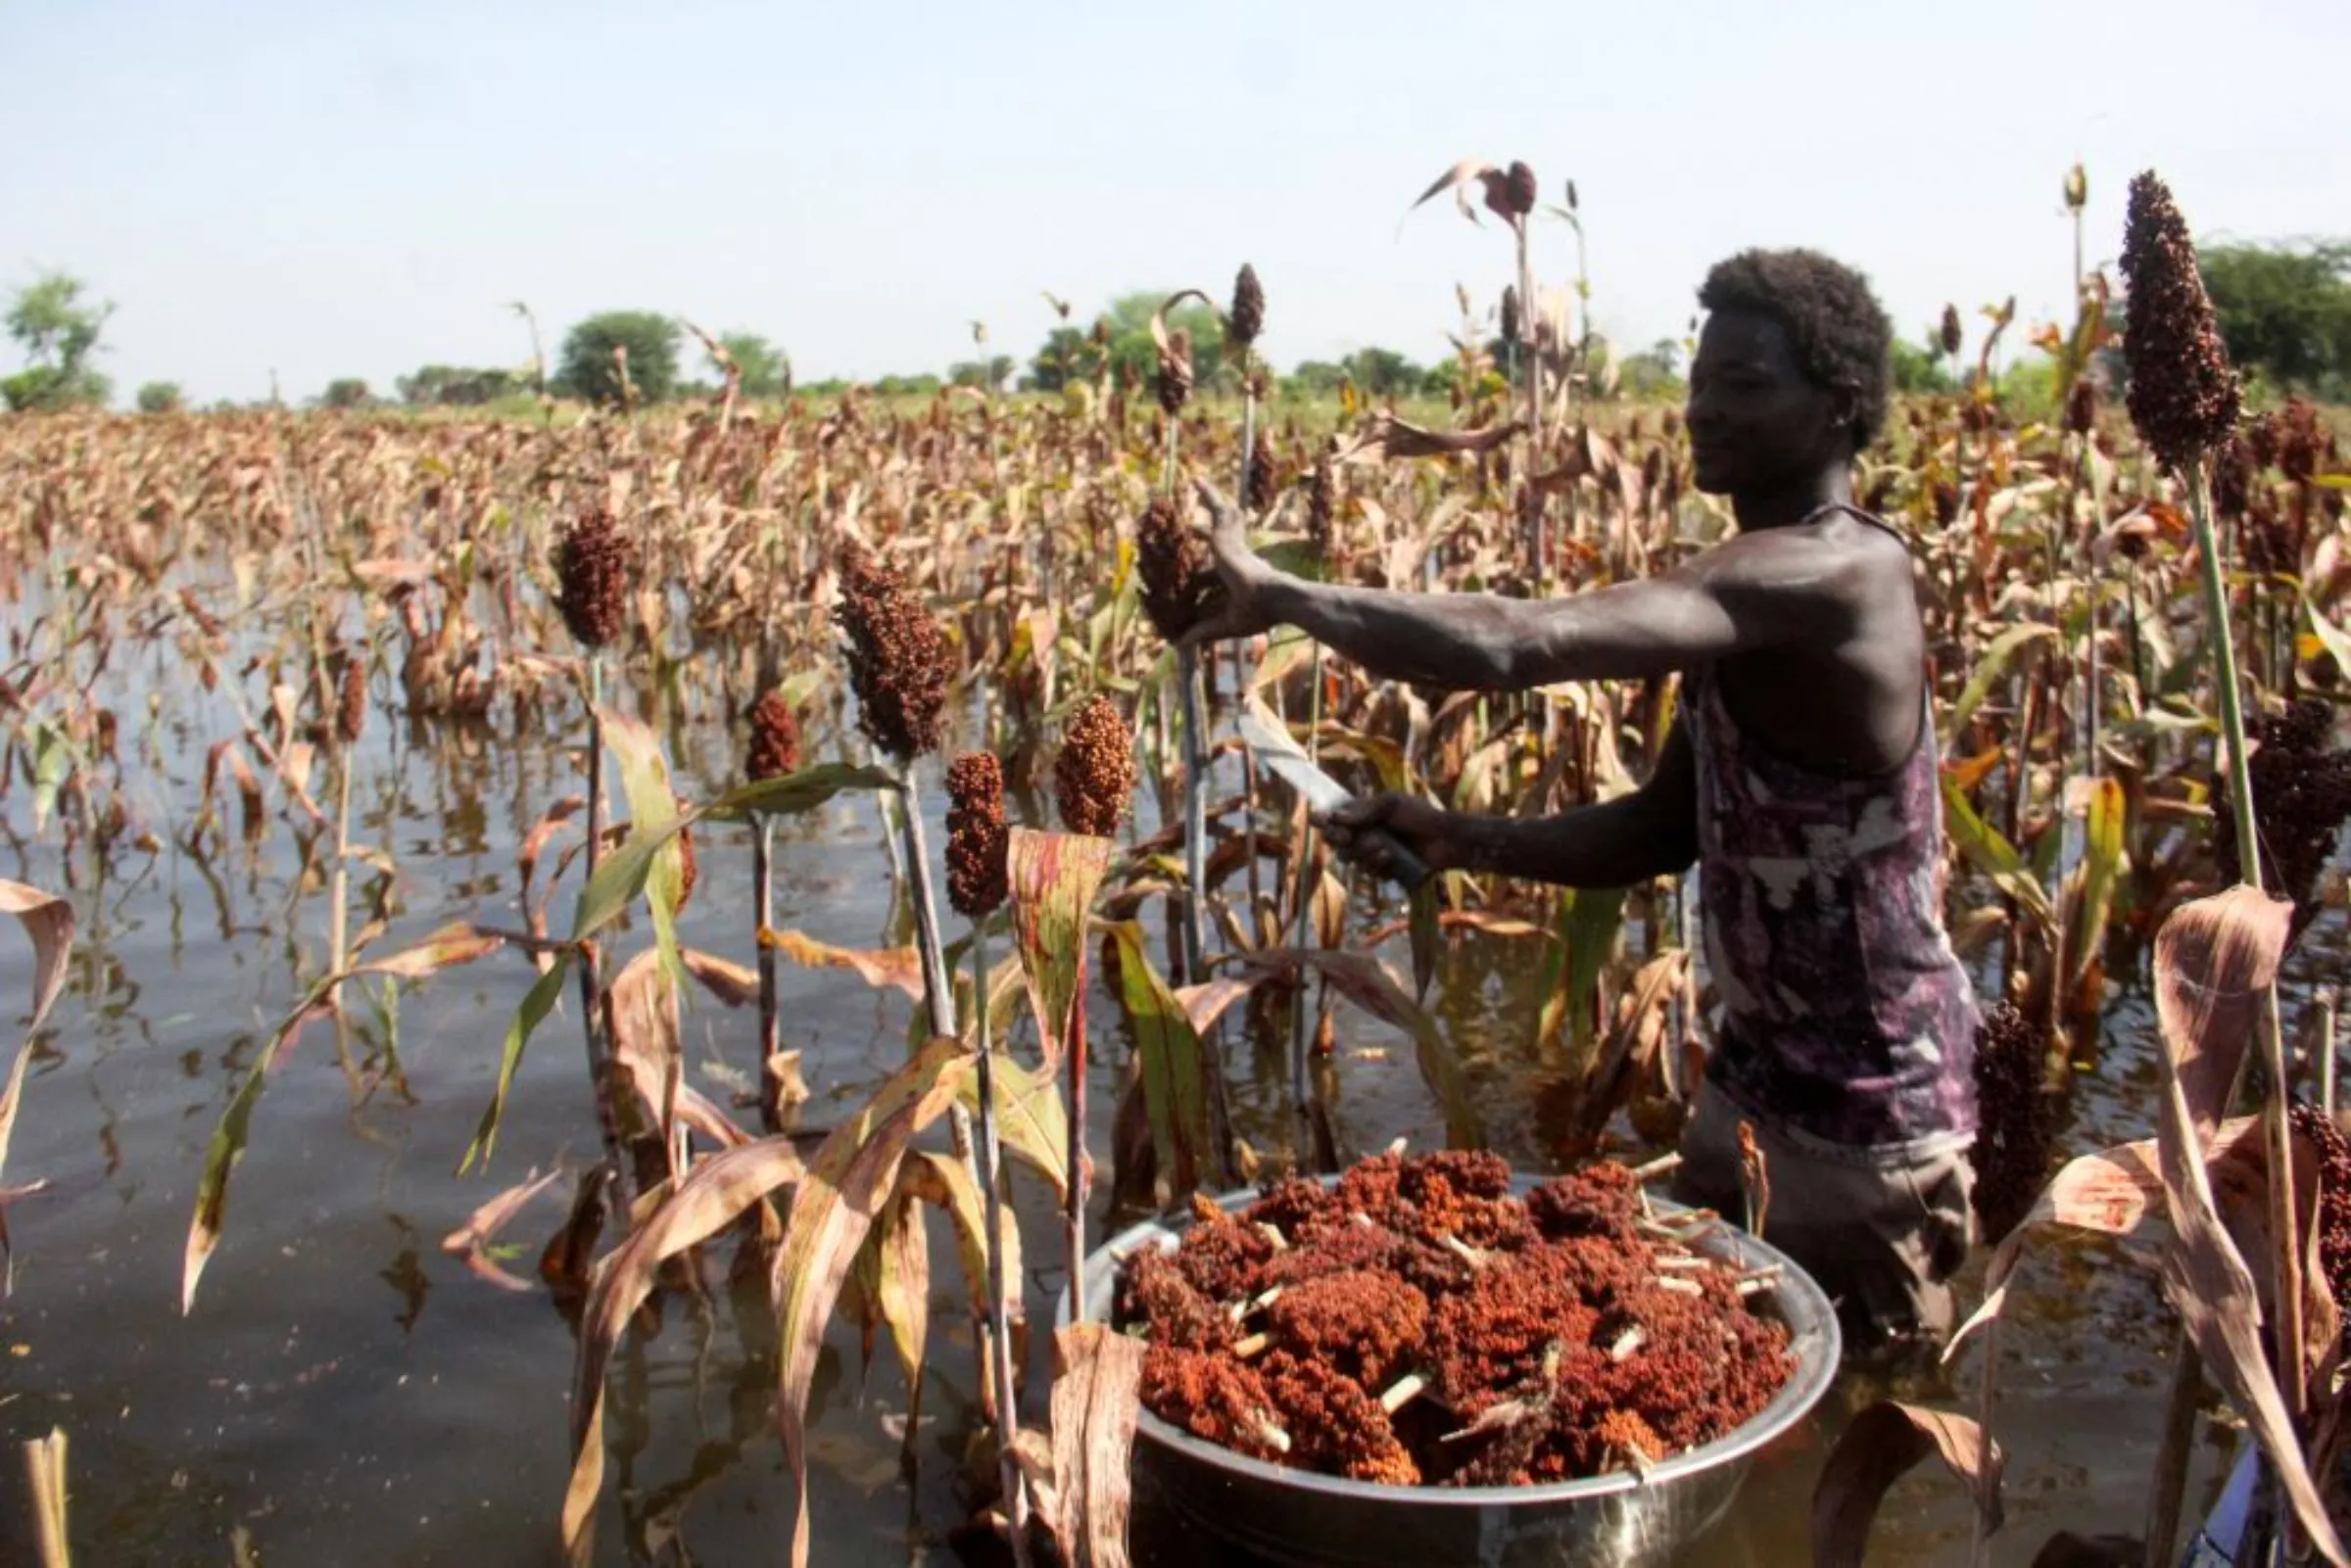 A farmer collects sorghum plant at his submerged red sorghum field after heavy rain in Kournari village, on the outskirts of Ndjamena, Chad October 26, 2022